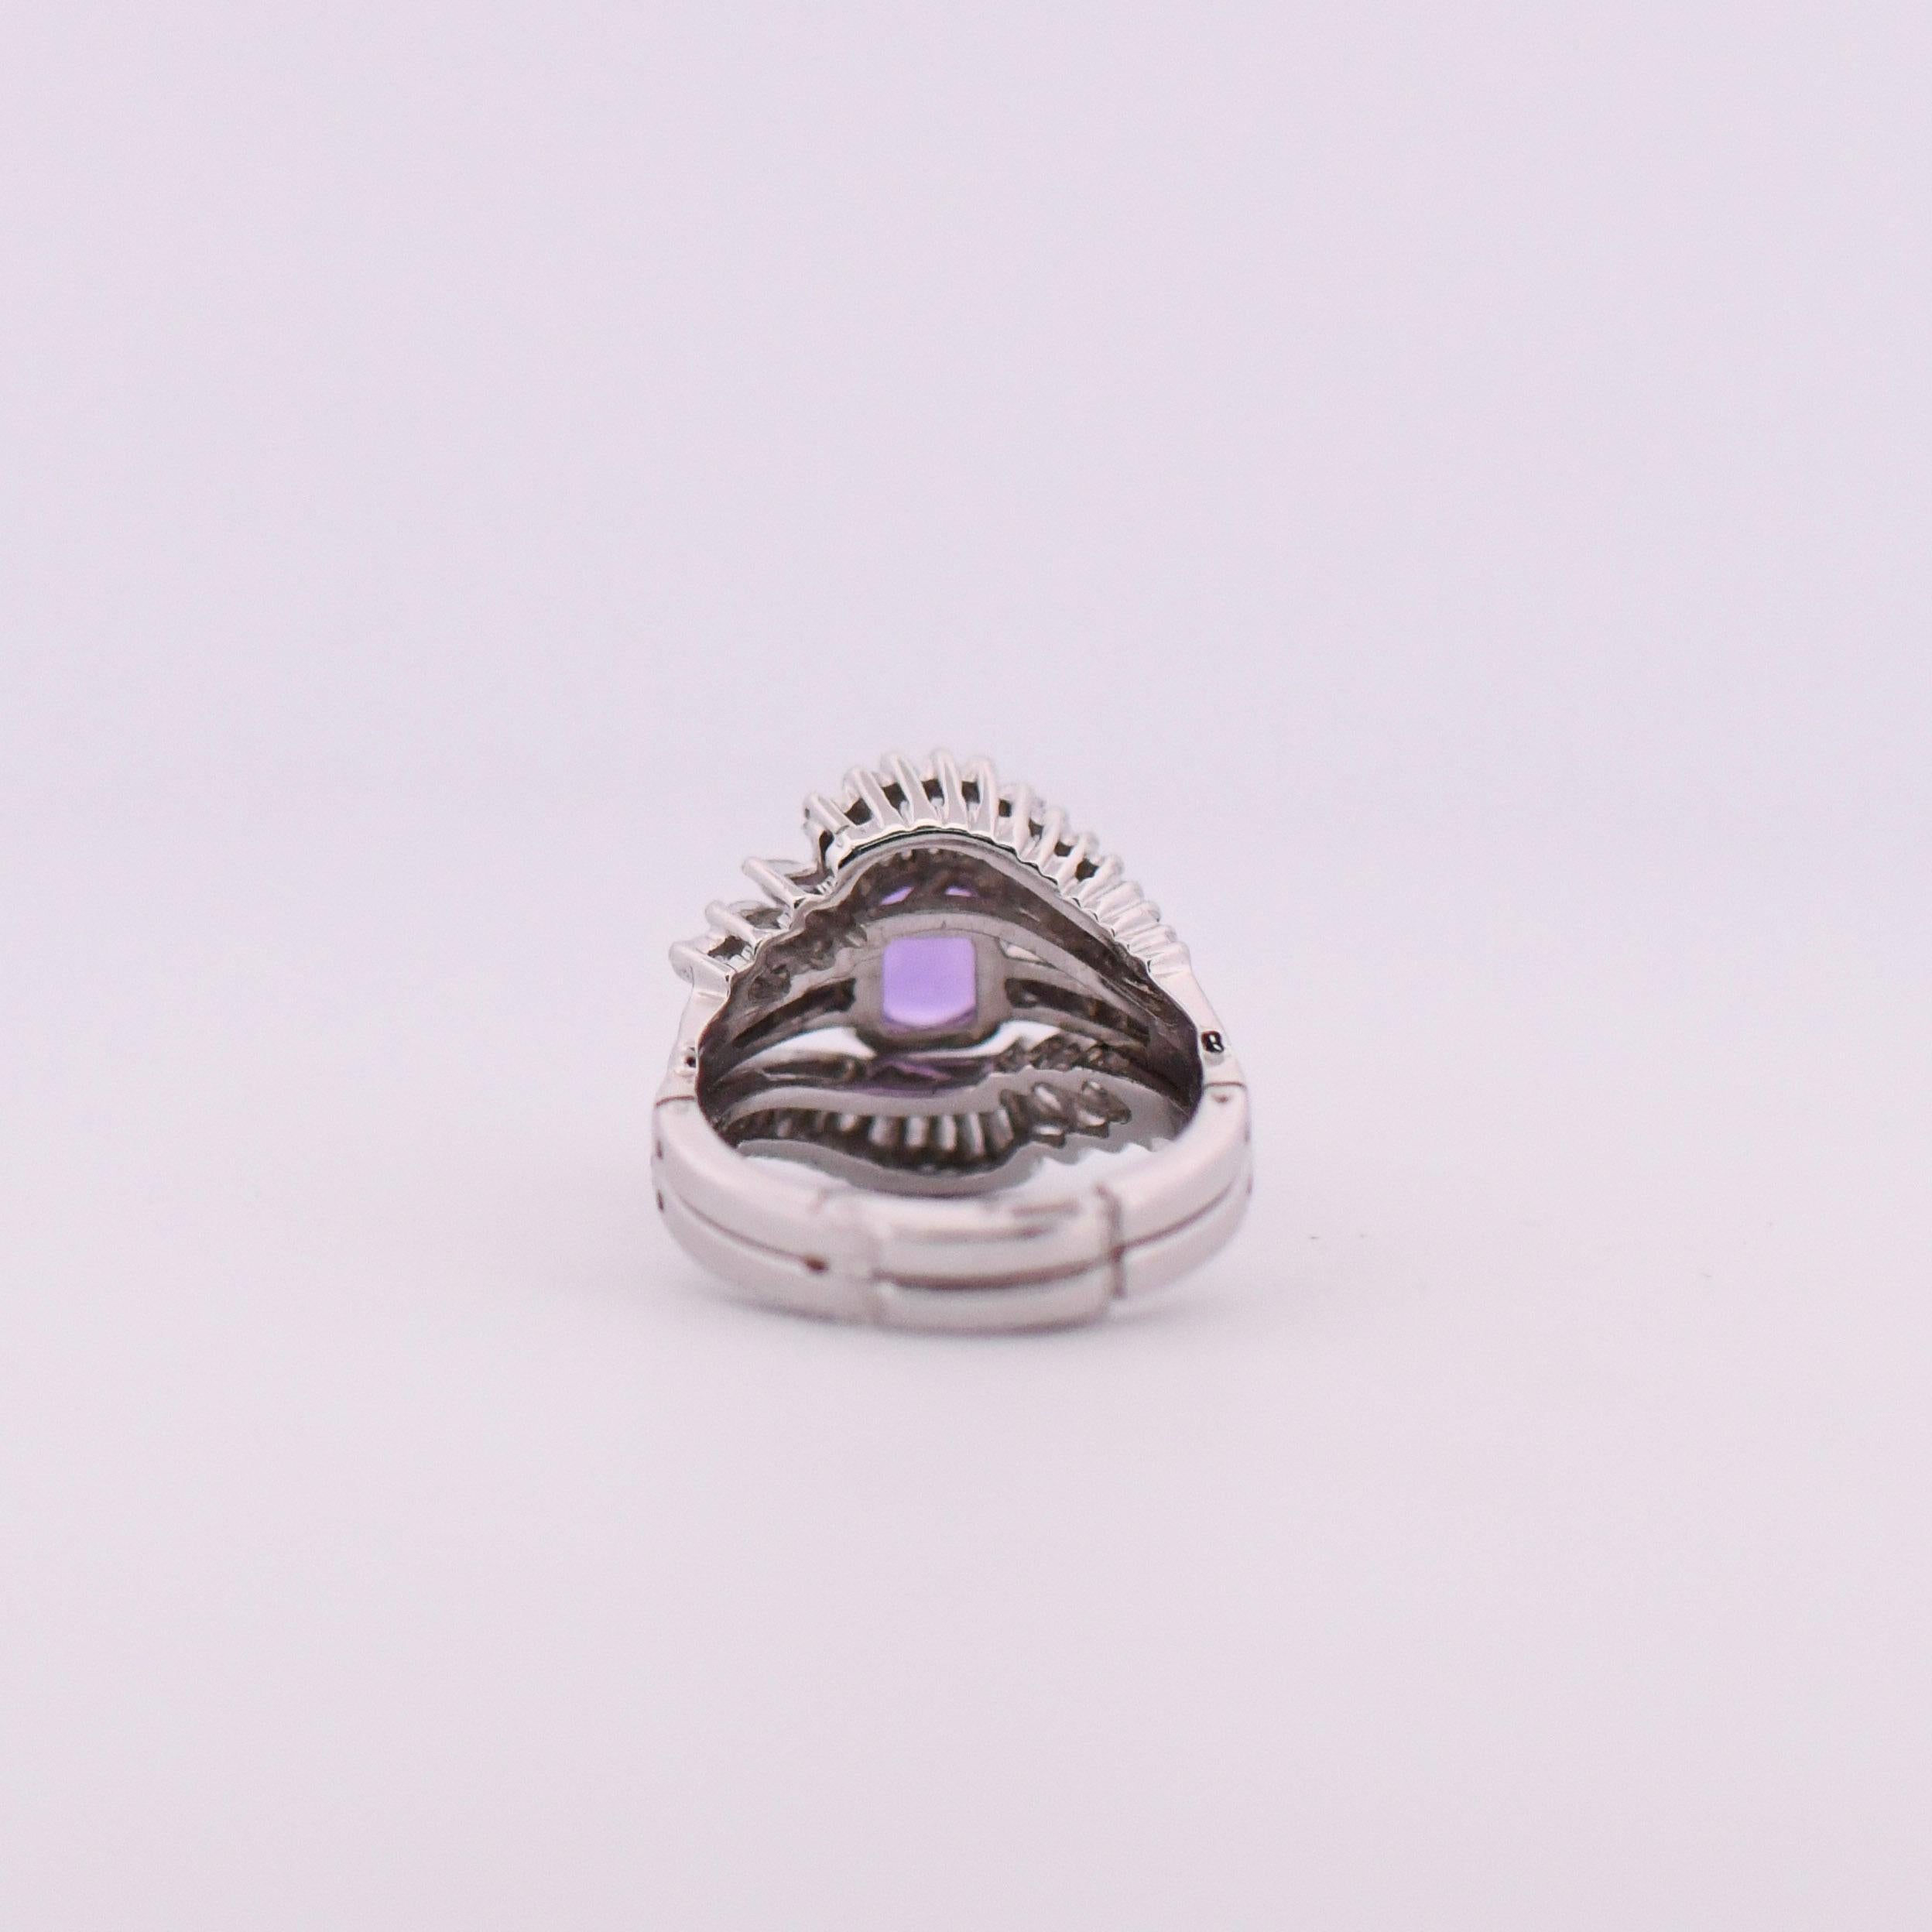 2.84ct Madagascar No Heat Purple Sapphire Platinum Diamond Wrapped Cocktail Ring In Good Condition For Sale In Addison, TX